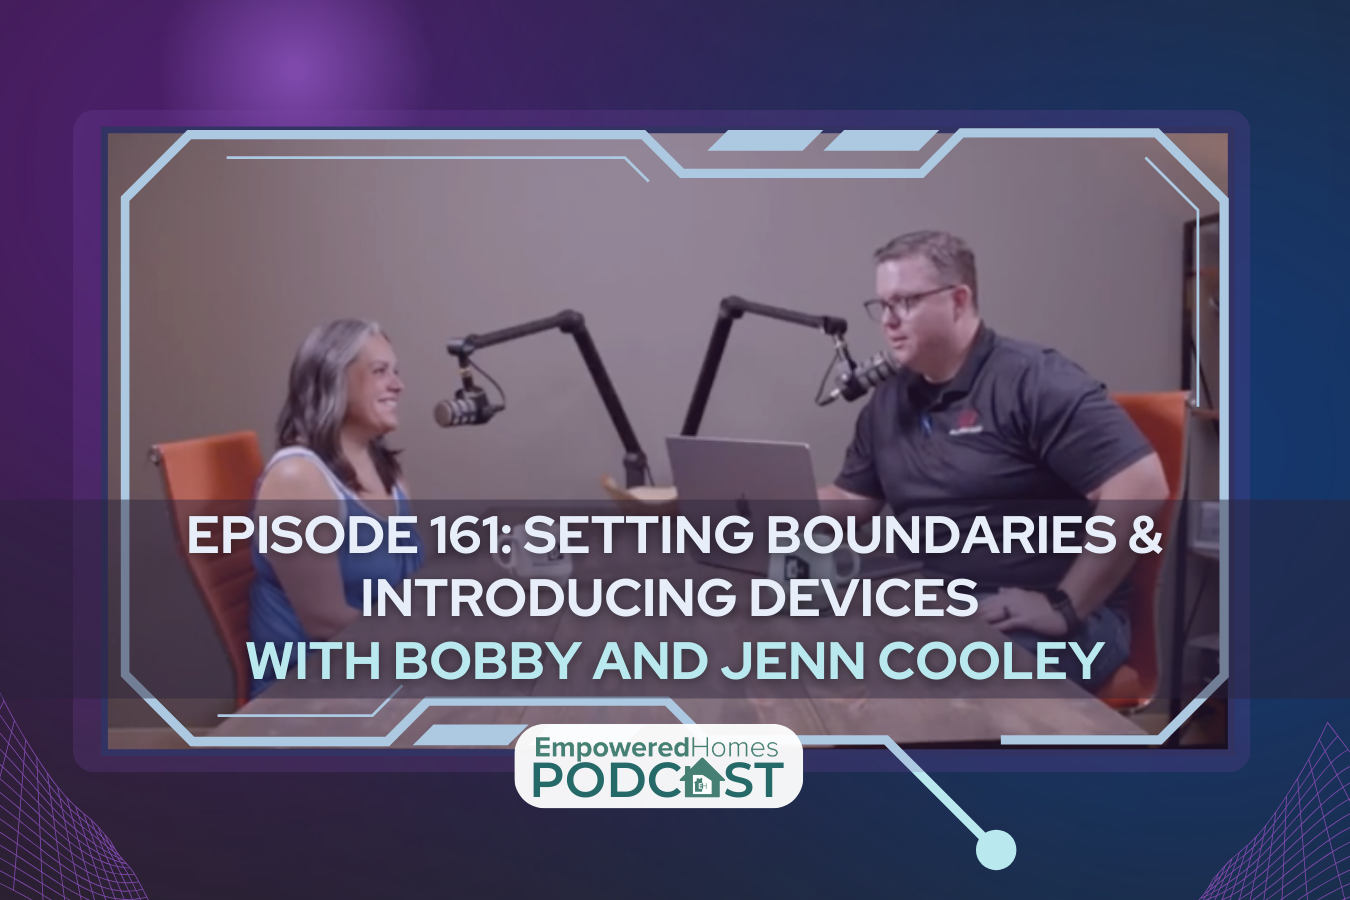 EH Podcast: Episode 161 Tech Talks: Introducing Devices and Boundaries with Bobby and Jenn Cooley